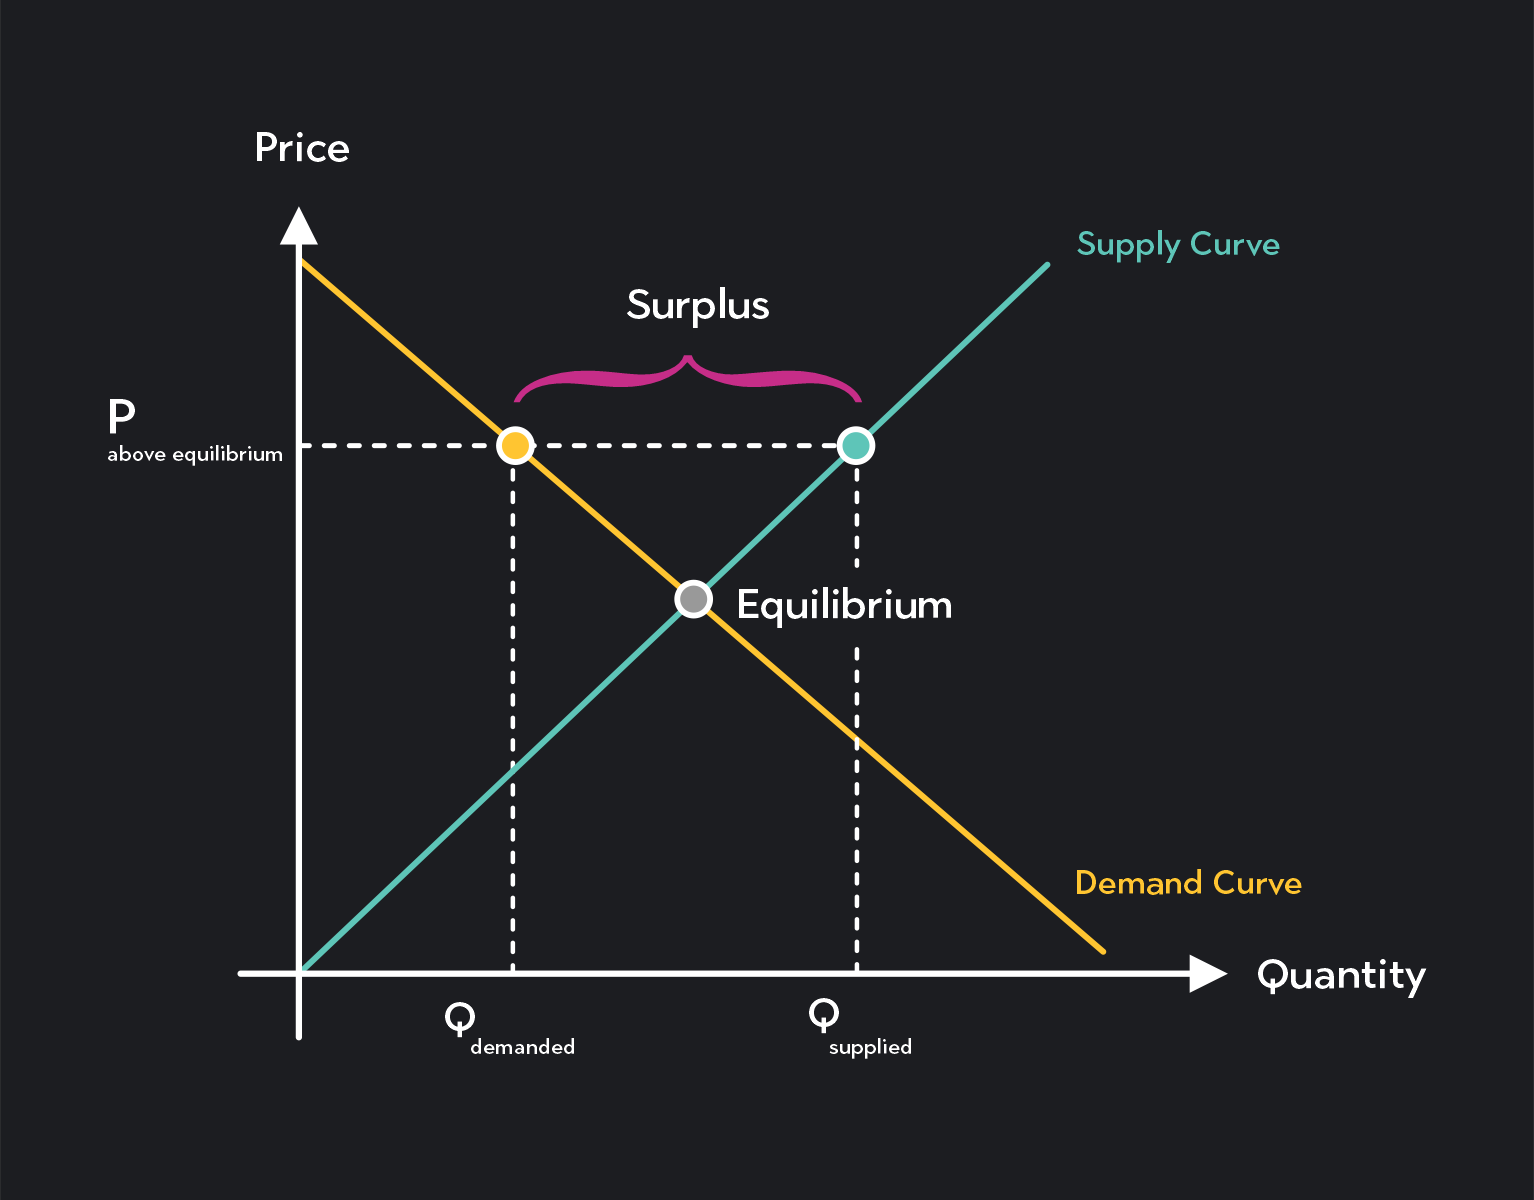 Graph showing that when the price is above equilibrium, there is a surplus